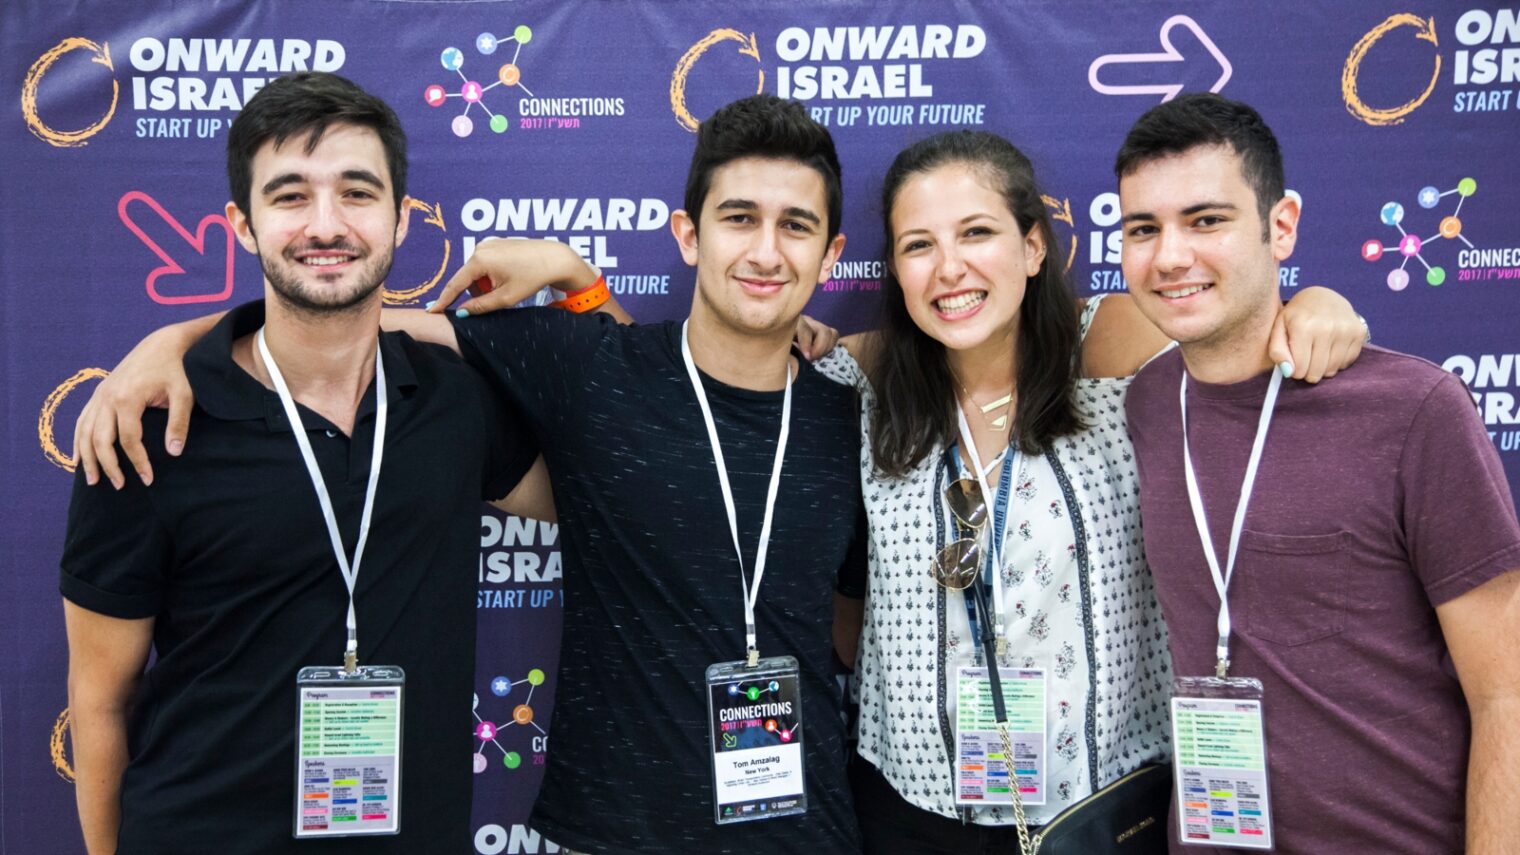 Israel is now a hot spot for college summer internships ISRAEL21c